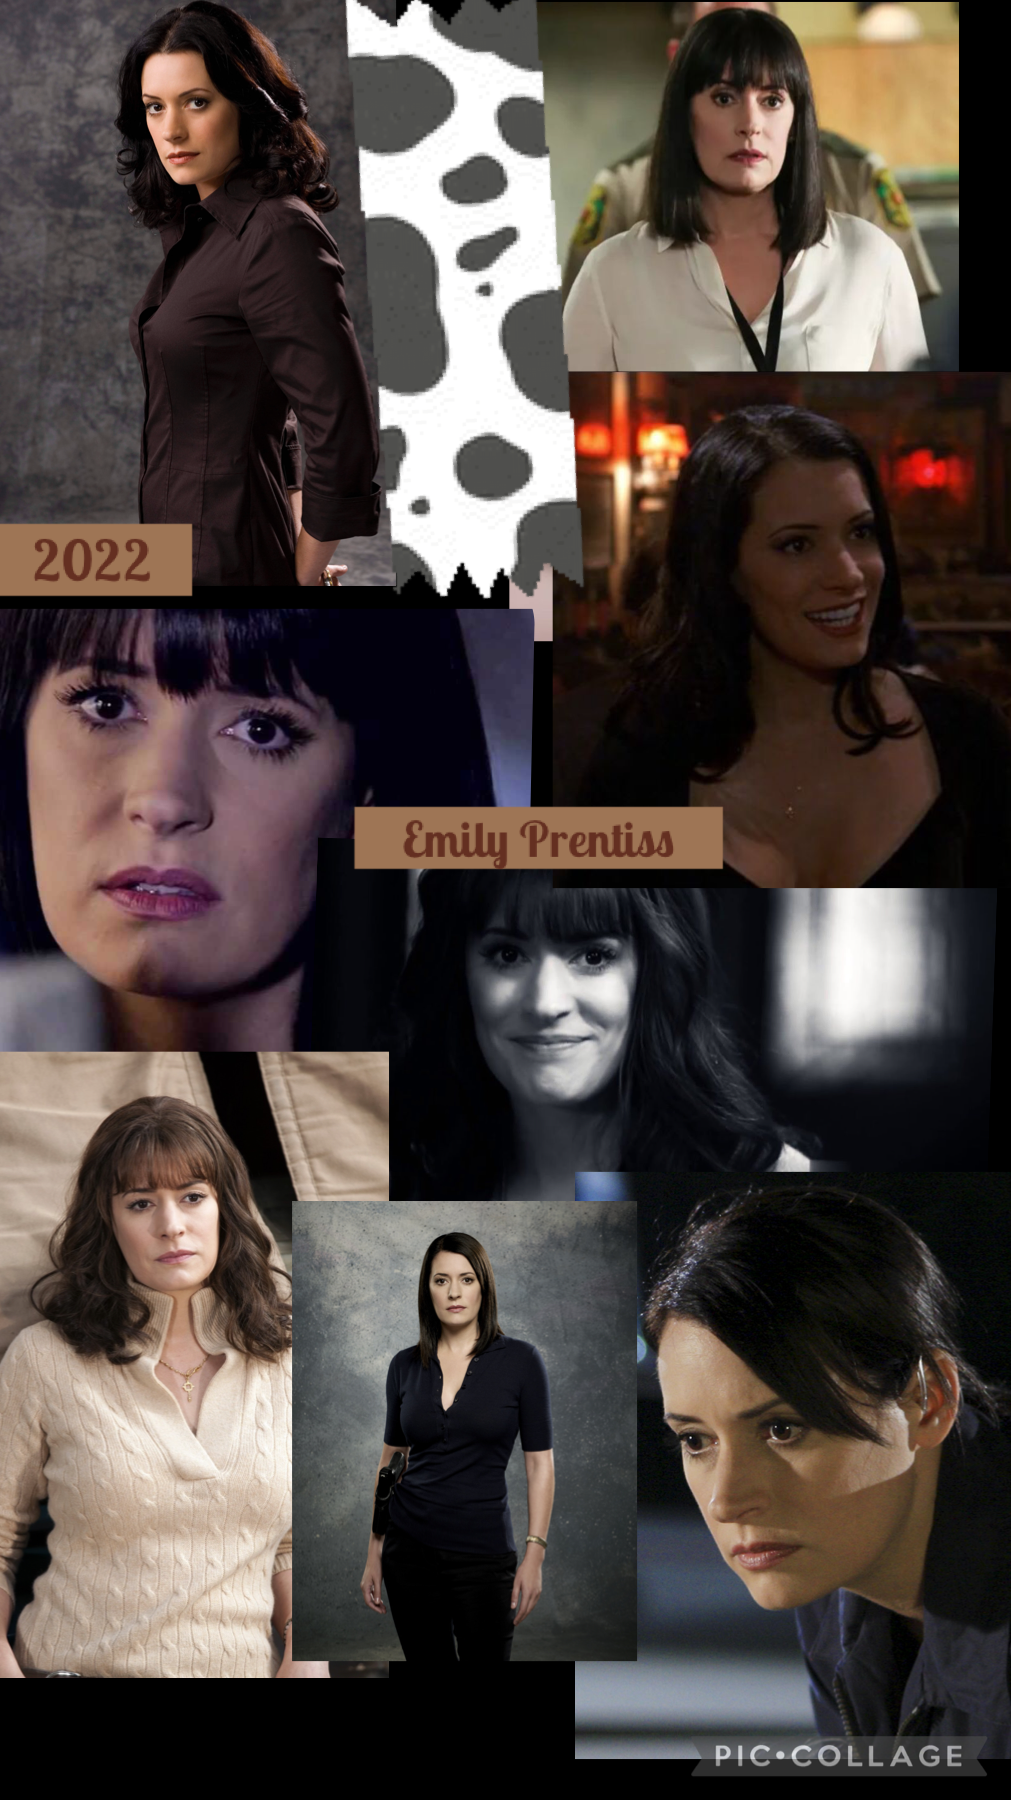 Agent Prentiss from criminal minds 